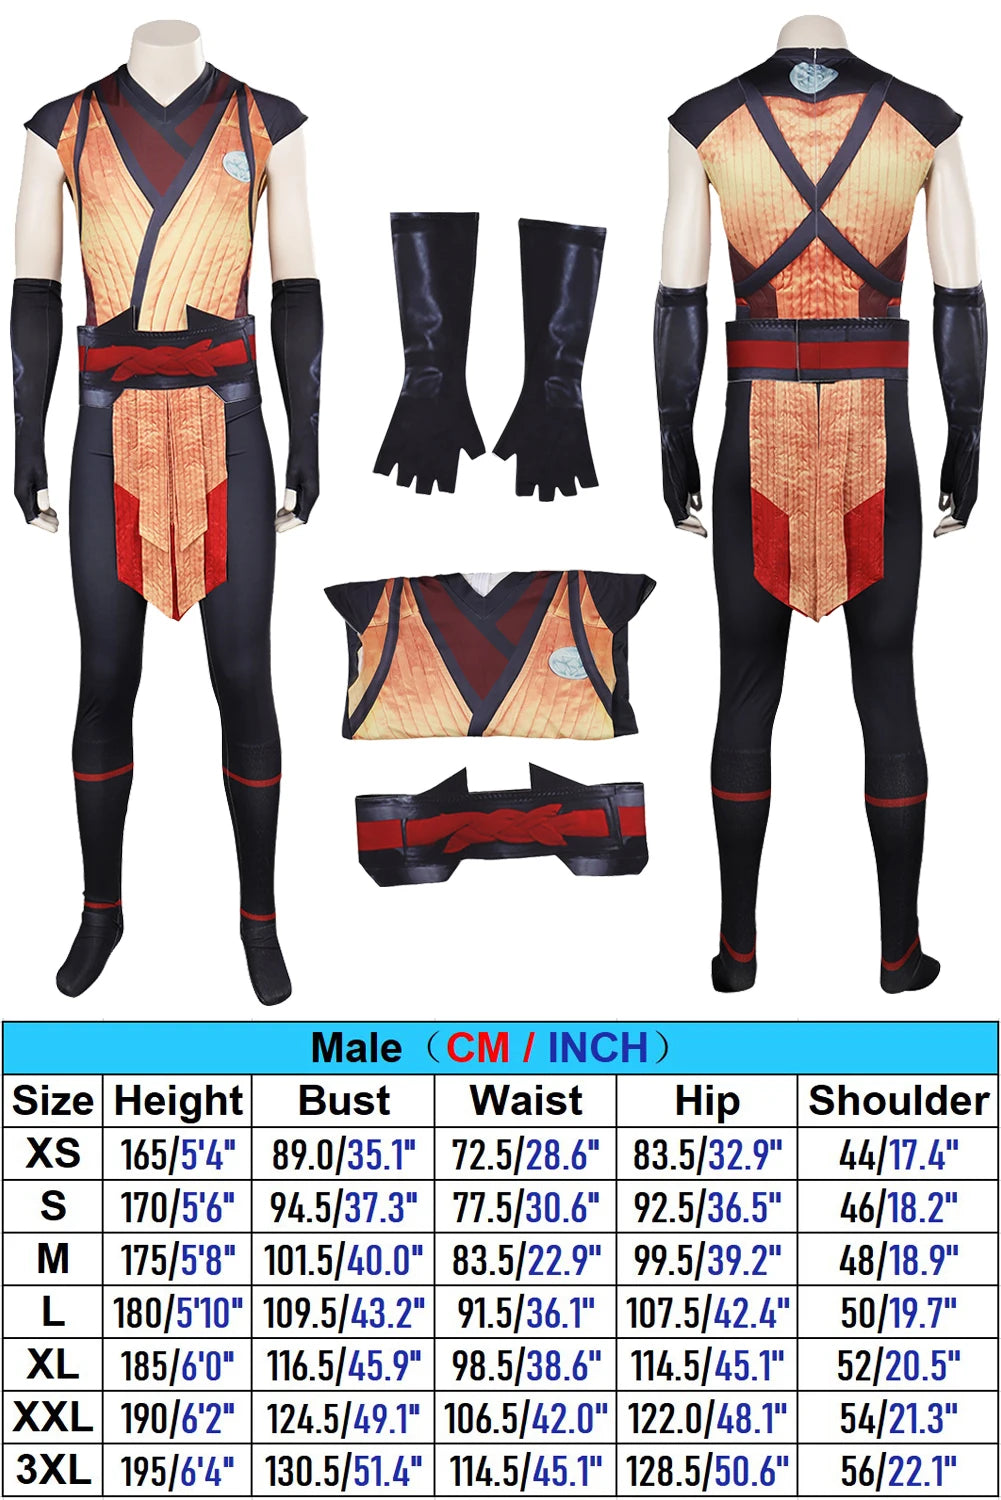 Scorpion Cosplay Fantasy Print Jumpsuit Mask - Inspired by Anime Game Mortal Kombat, Ideal for Costume Disguise and Adult Men's Cosplay Roleplay Outfits-Only Clothes-XS-